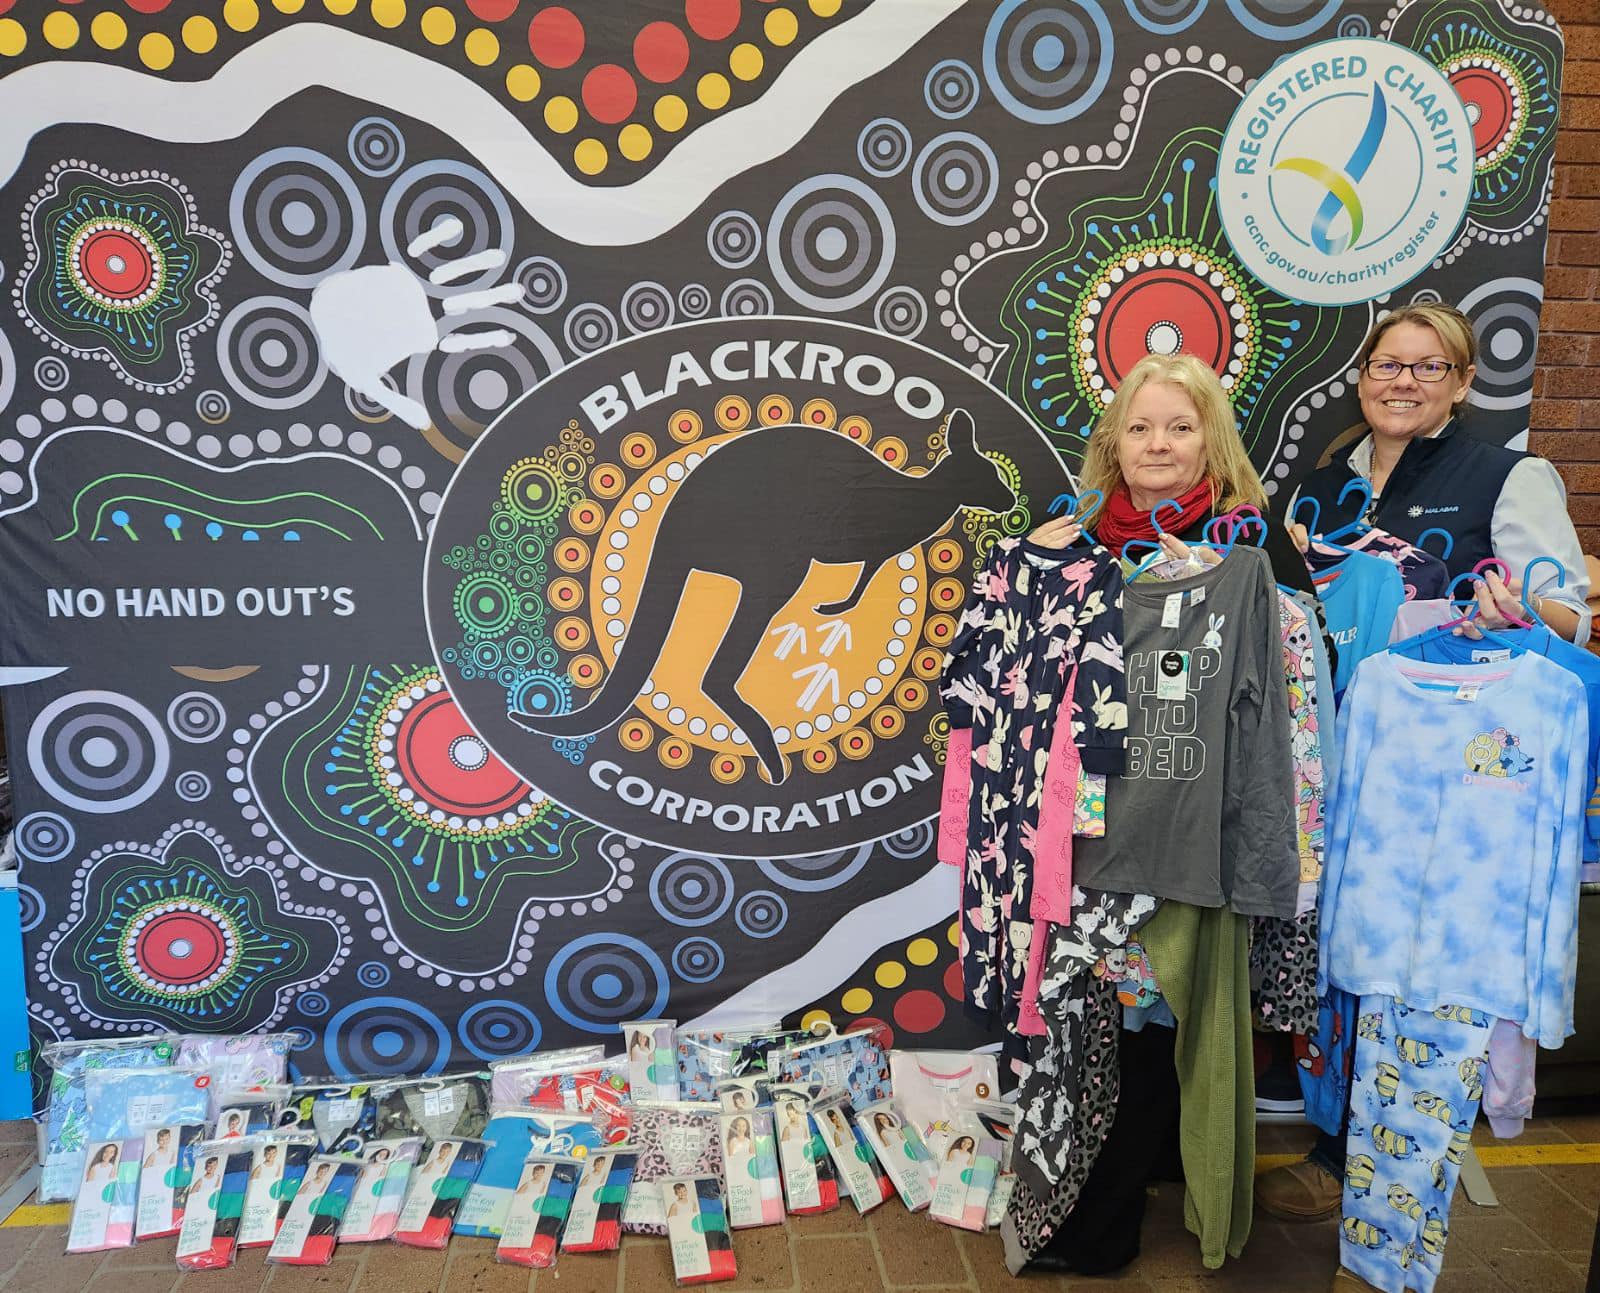 Malabar Supports Blackroo Community Indigenous Corporation with Donation of Kids’ Essentials